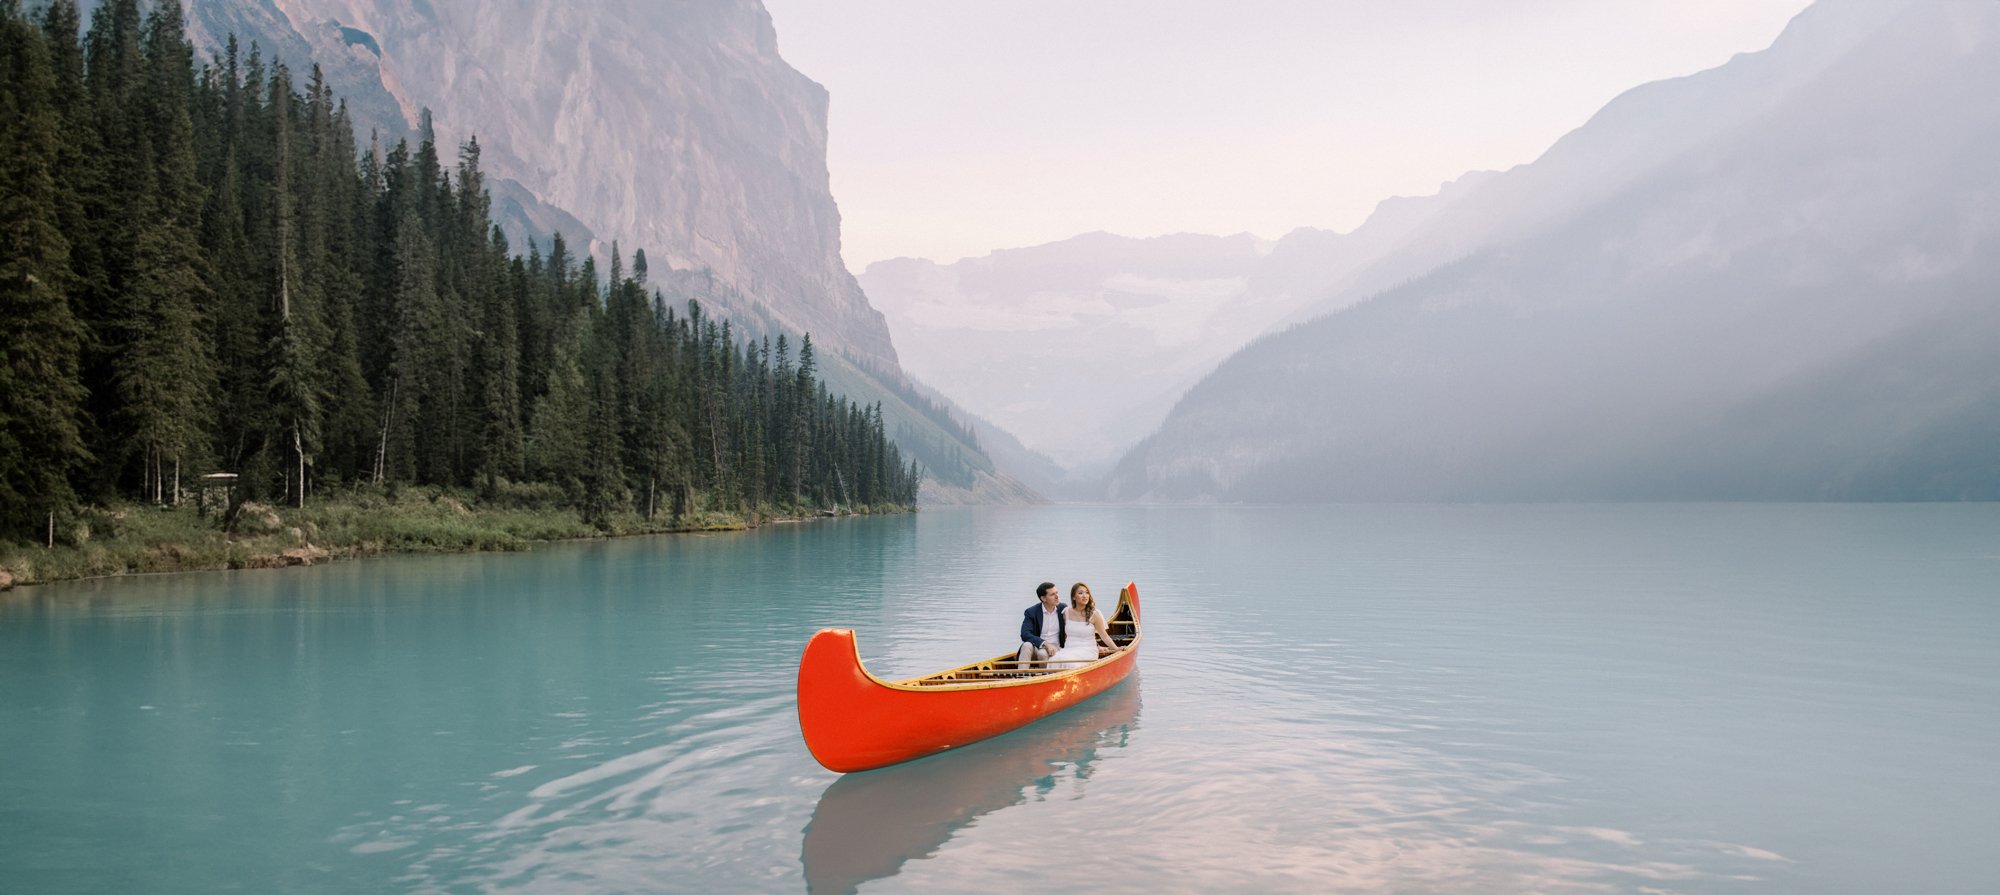 Couple in red canoe on Lake Louise during sunset